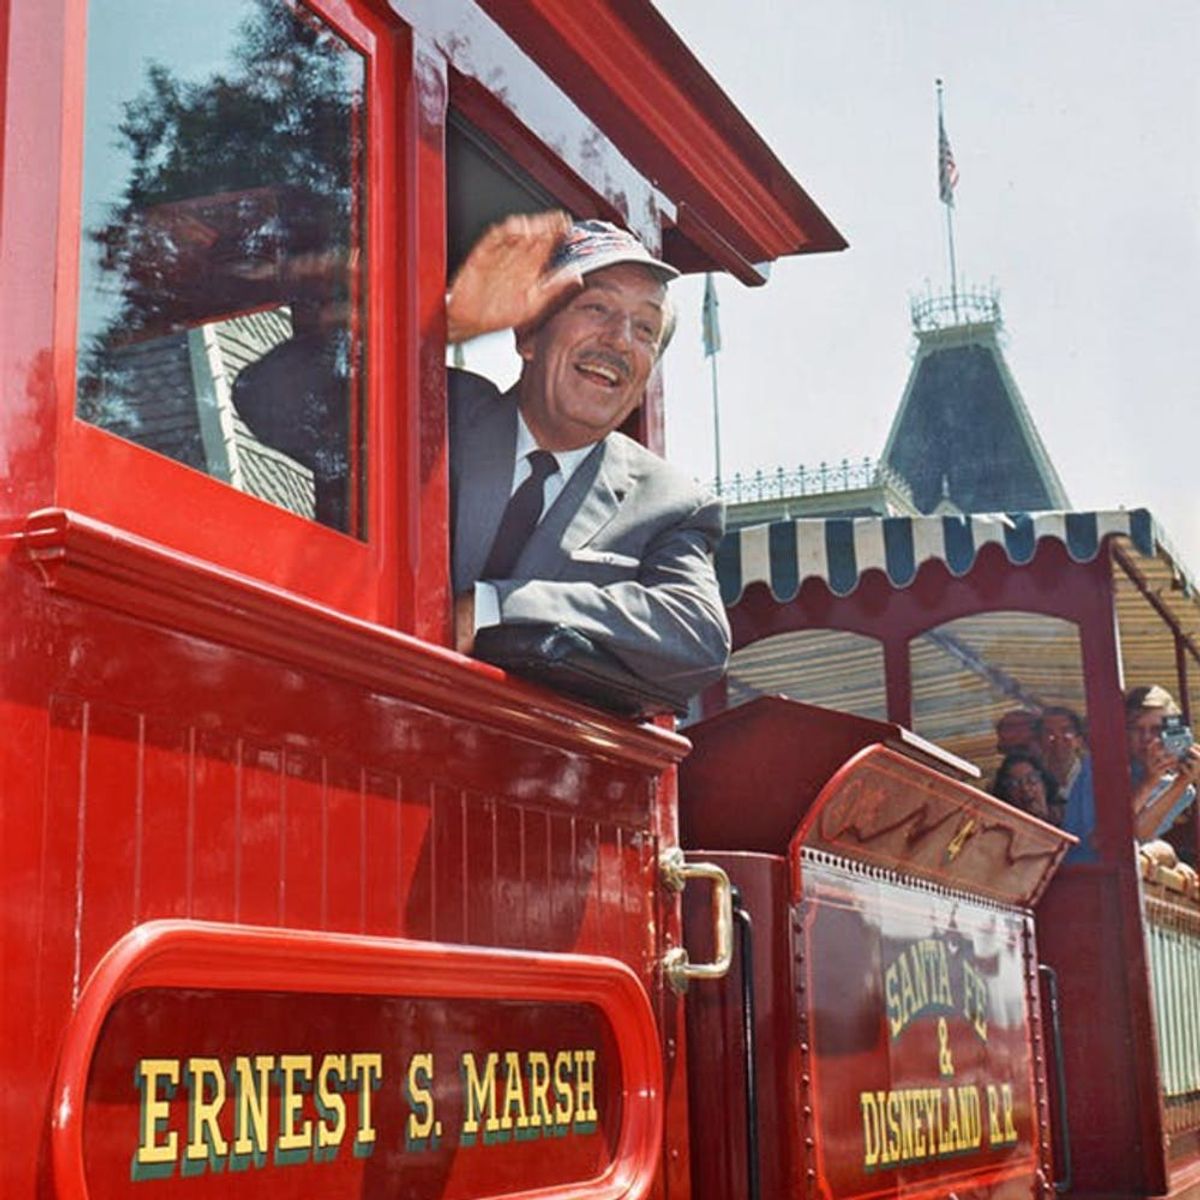 11 Classic Disneyland Rides That Never Go Out of Style